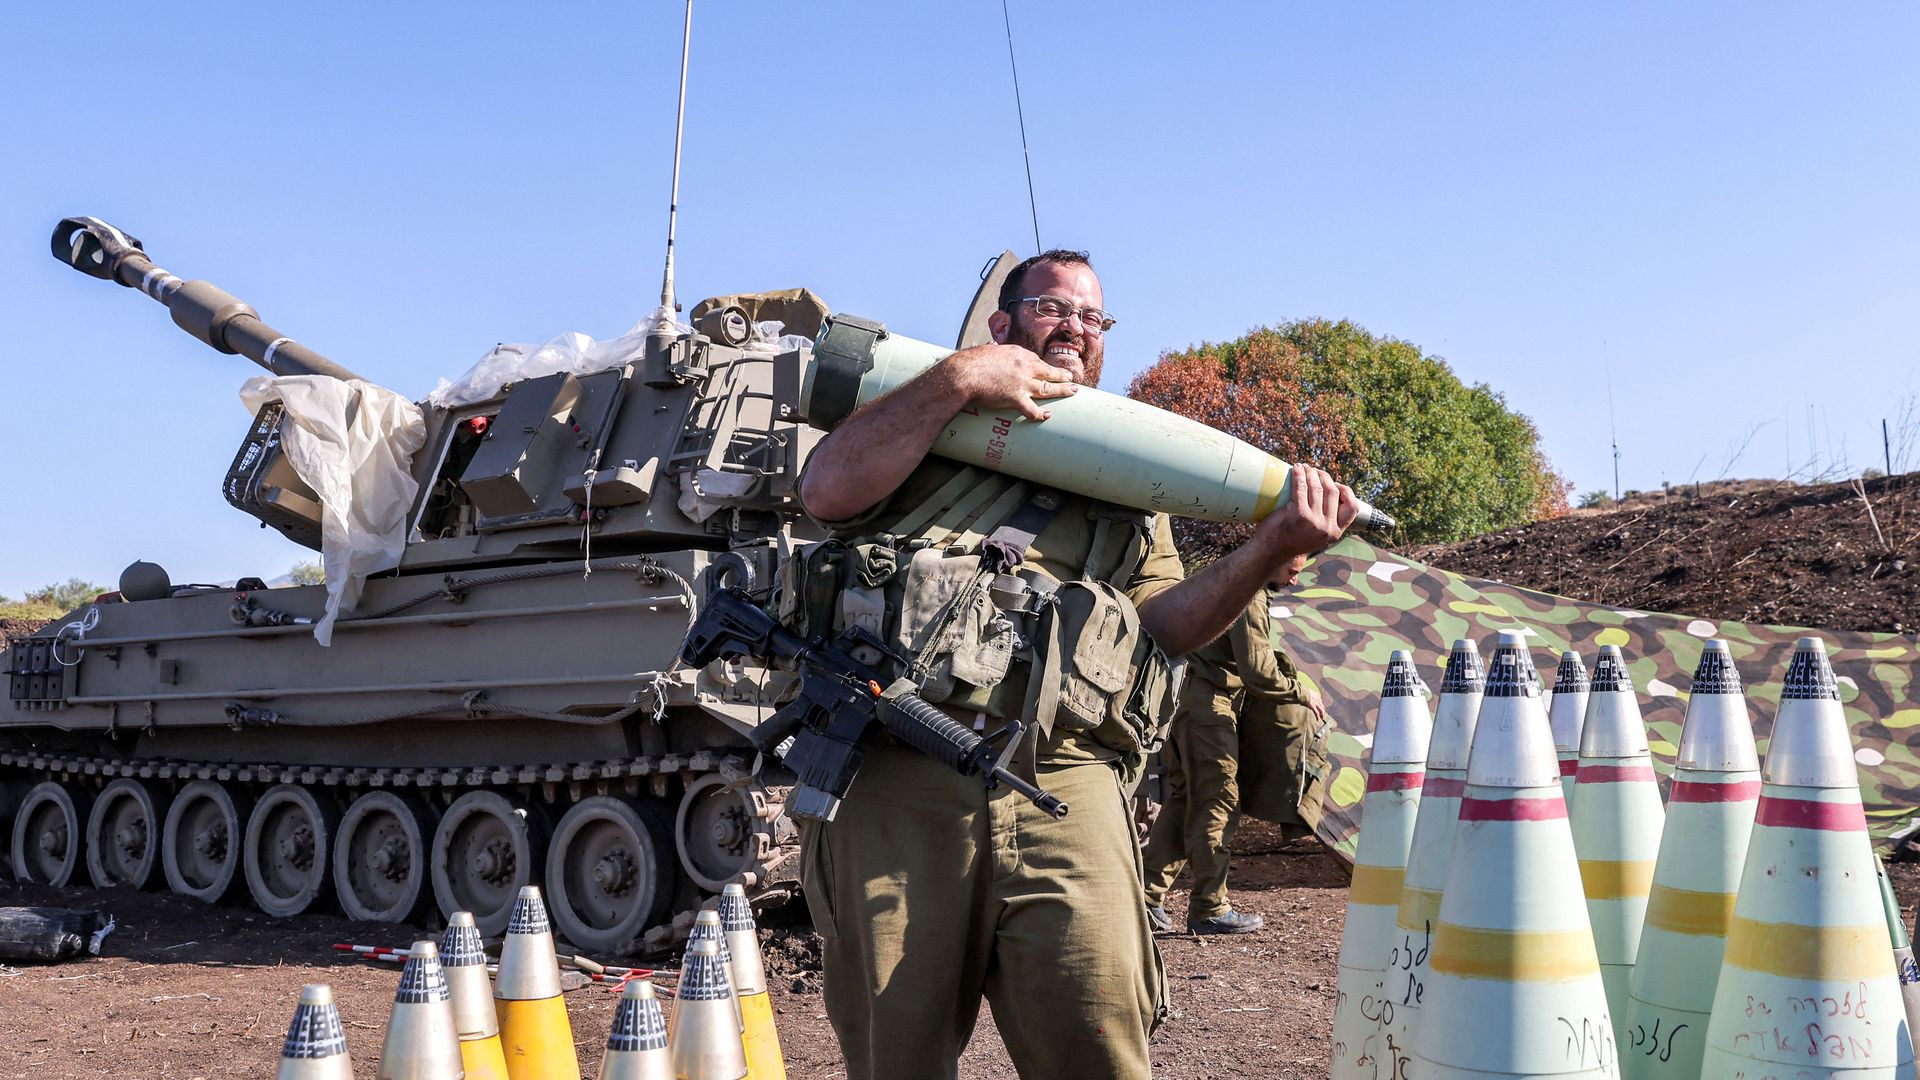 An Israeli soldier lifts a 155mm artillery shell with a self-propelled Howitzer in the background. 